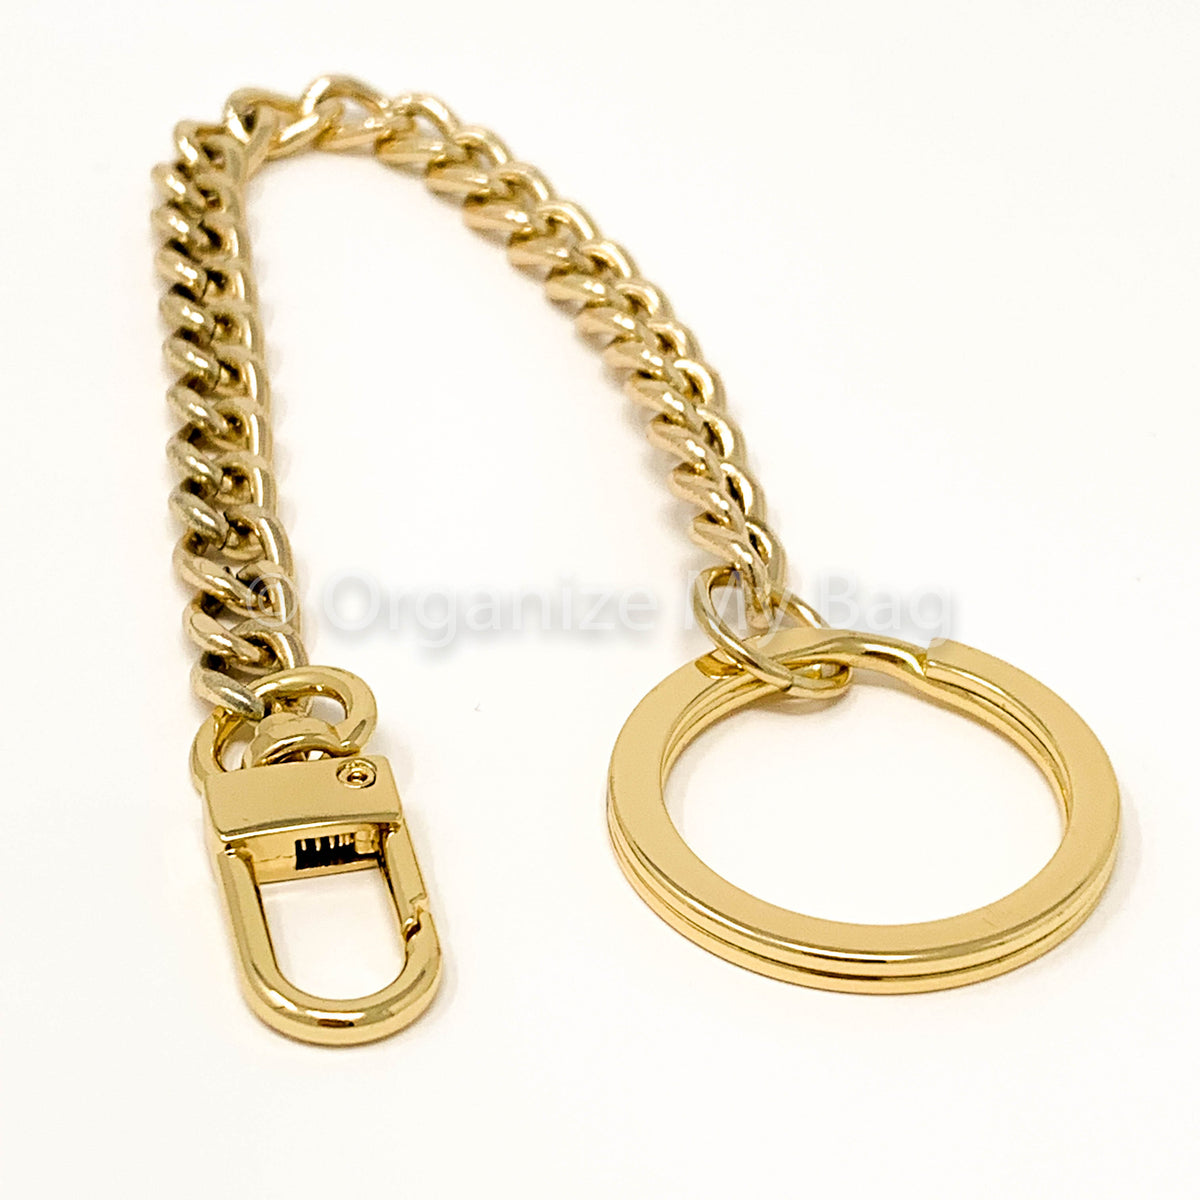 Organizemybags Bag Charm with Double Clasp